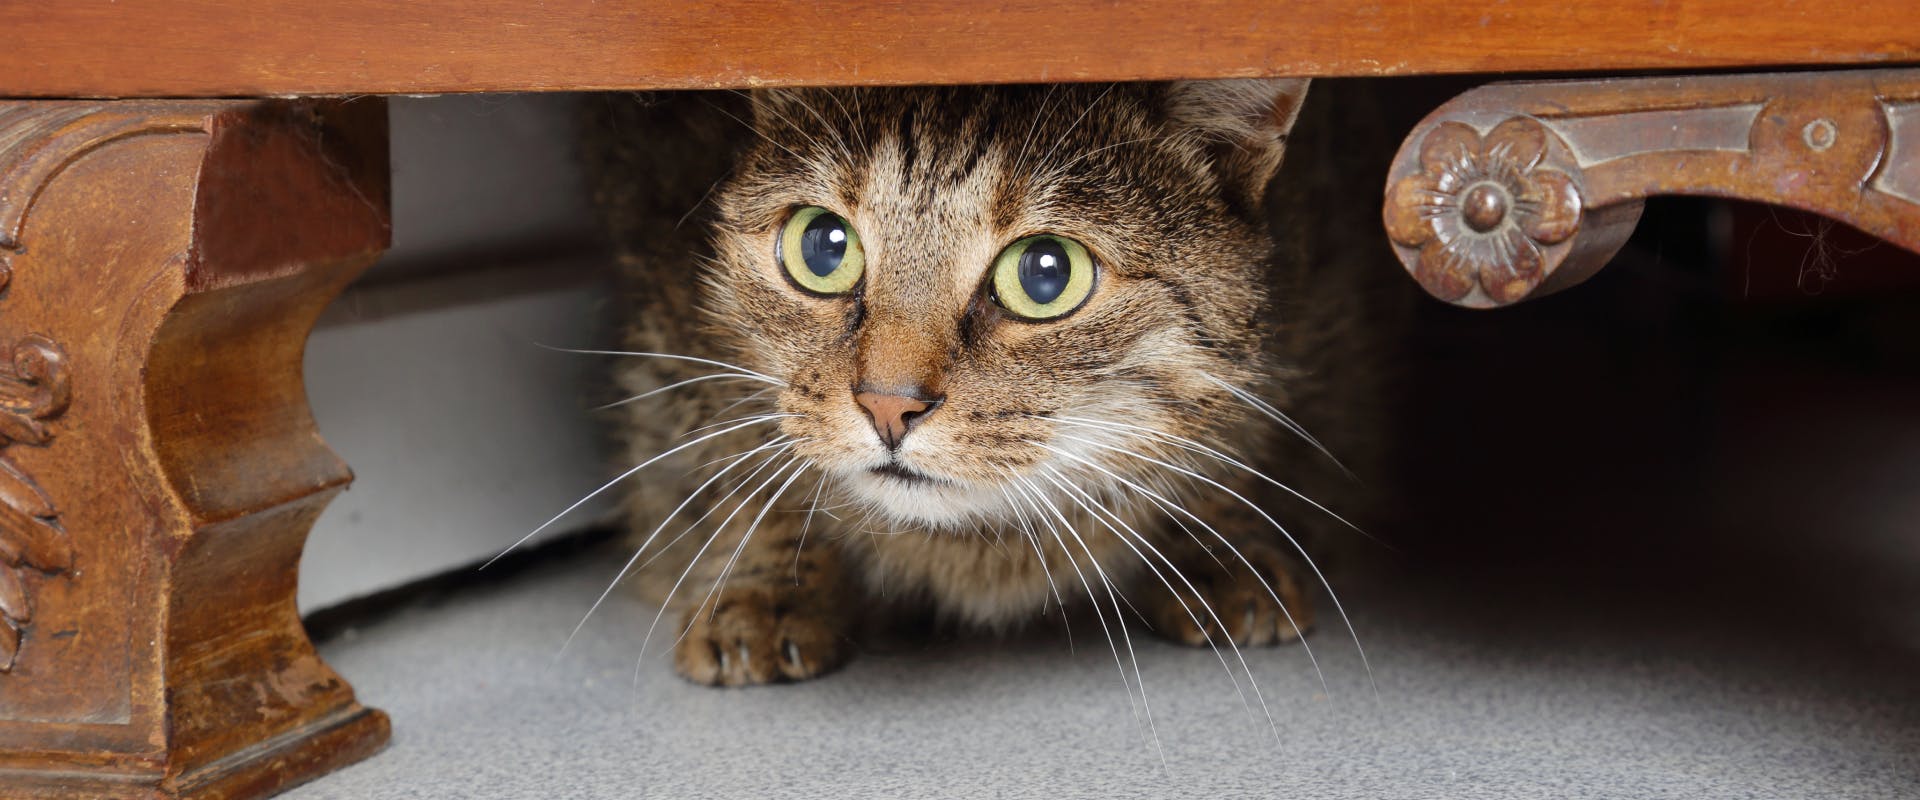 an anxious cat hiding underneath a wooden set of draws